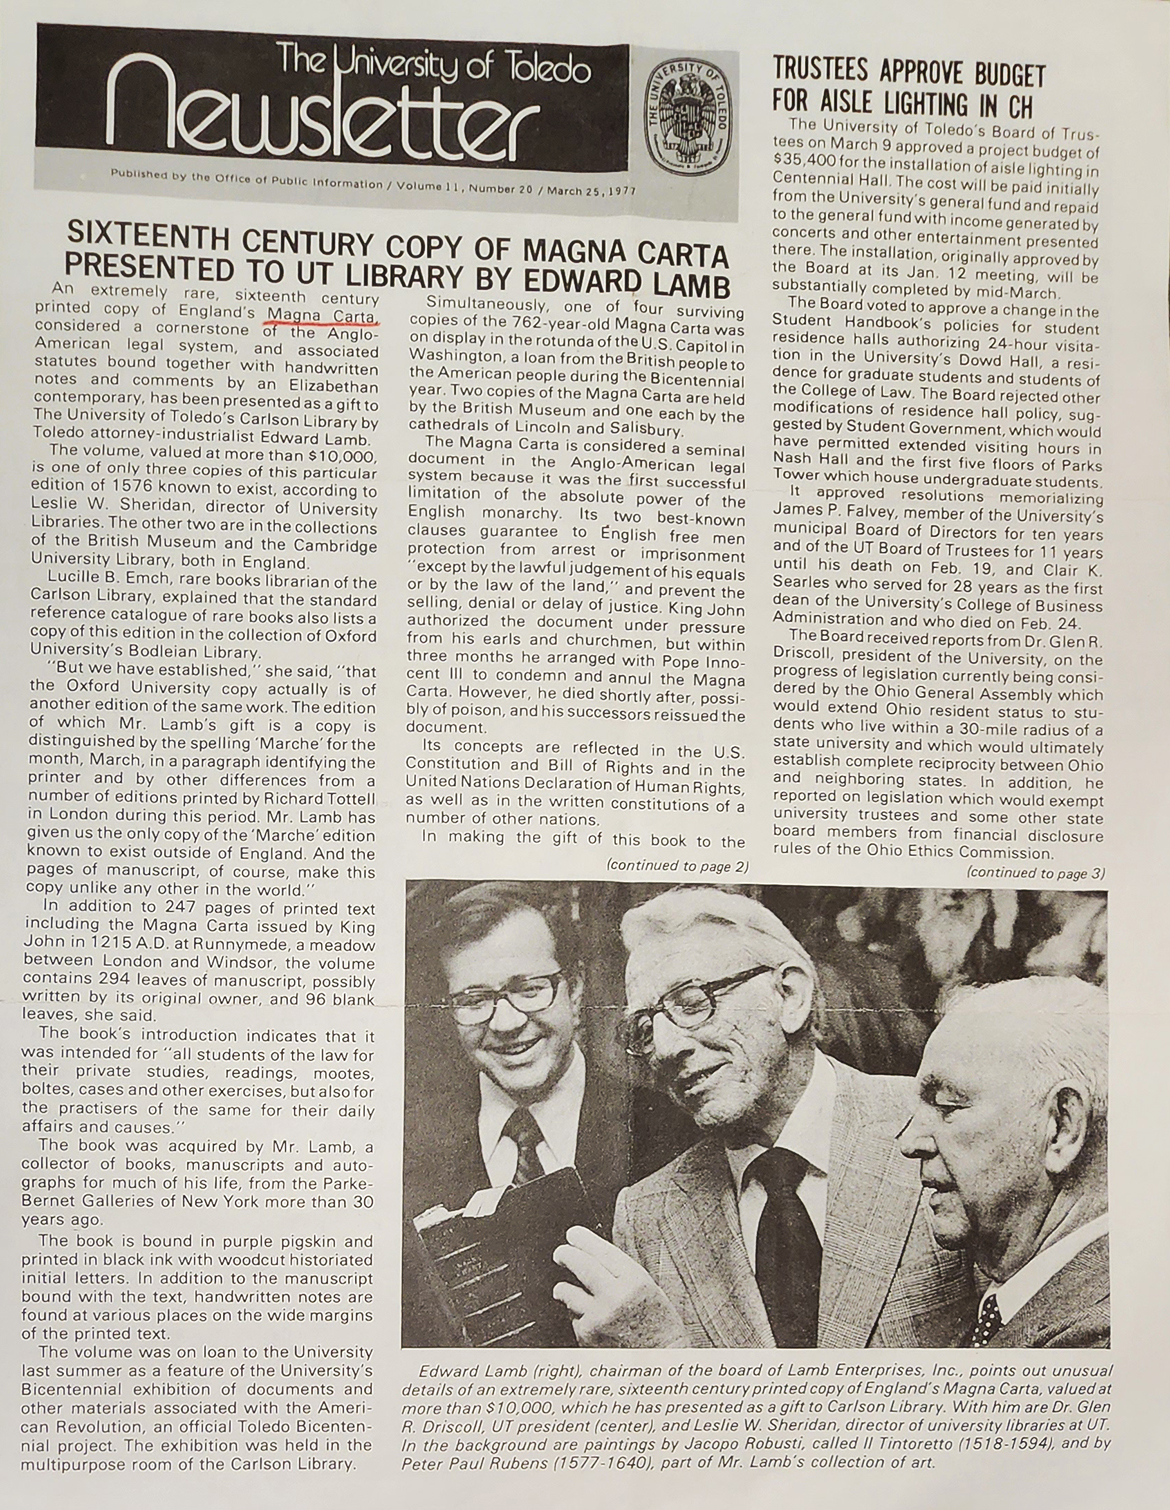 Sixteenth Century Copy of Magna Carta Presented to UT Library by Edward Lamb (The University of Toledo Newsletter, March 25, 1977)